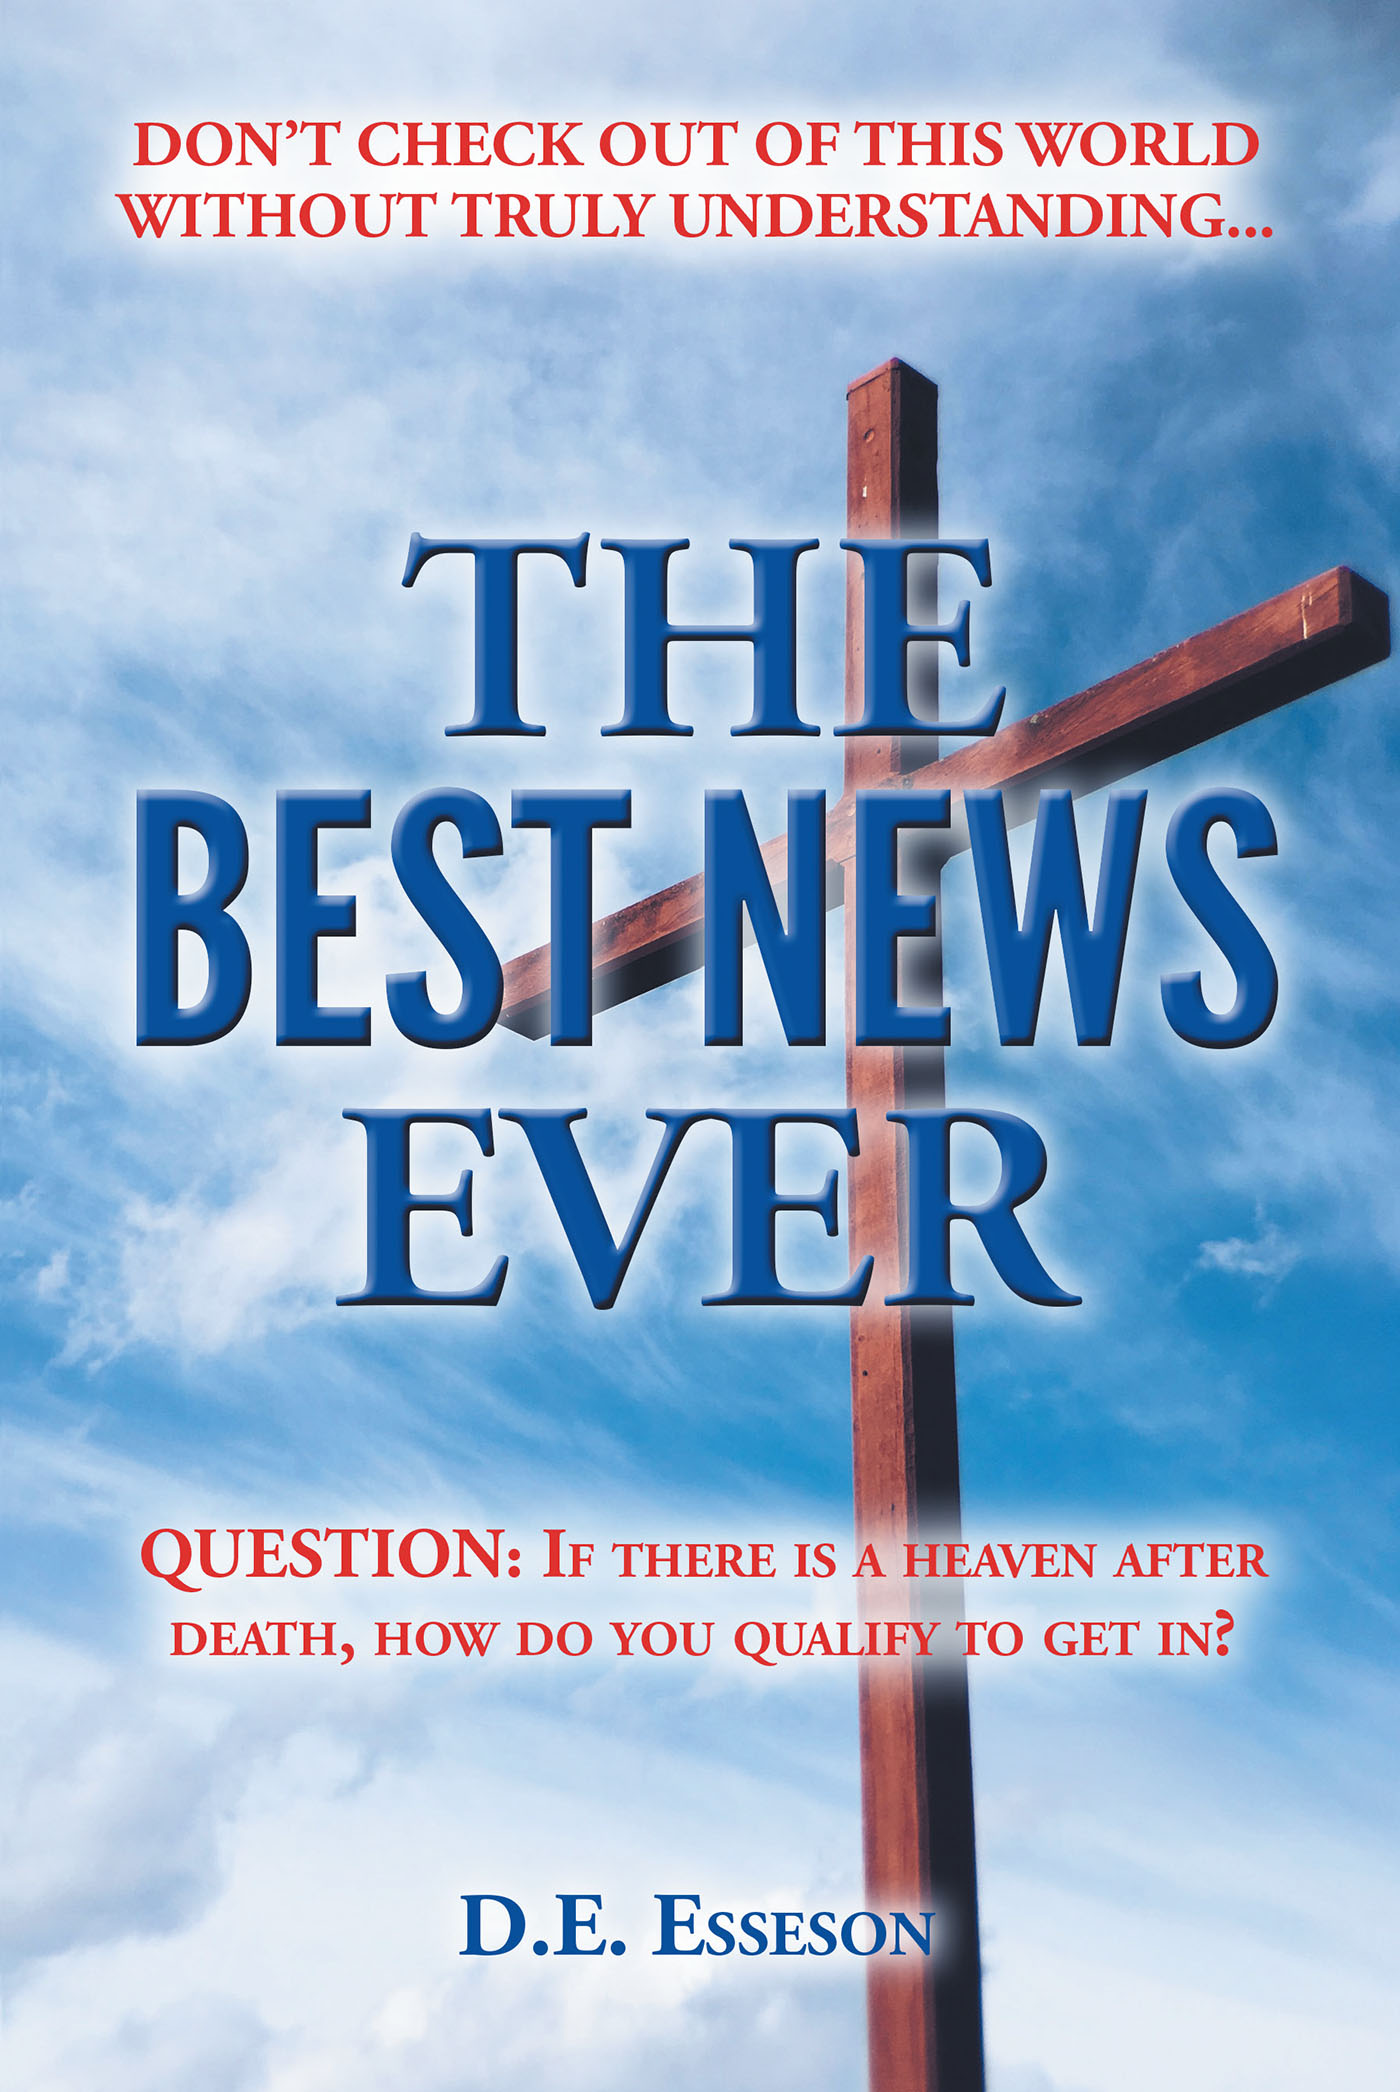 D.E. Esseson’s Newly Released “The Best News Ever” is an Uplifting Exploration of the Gospel of Jesus Christ